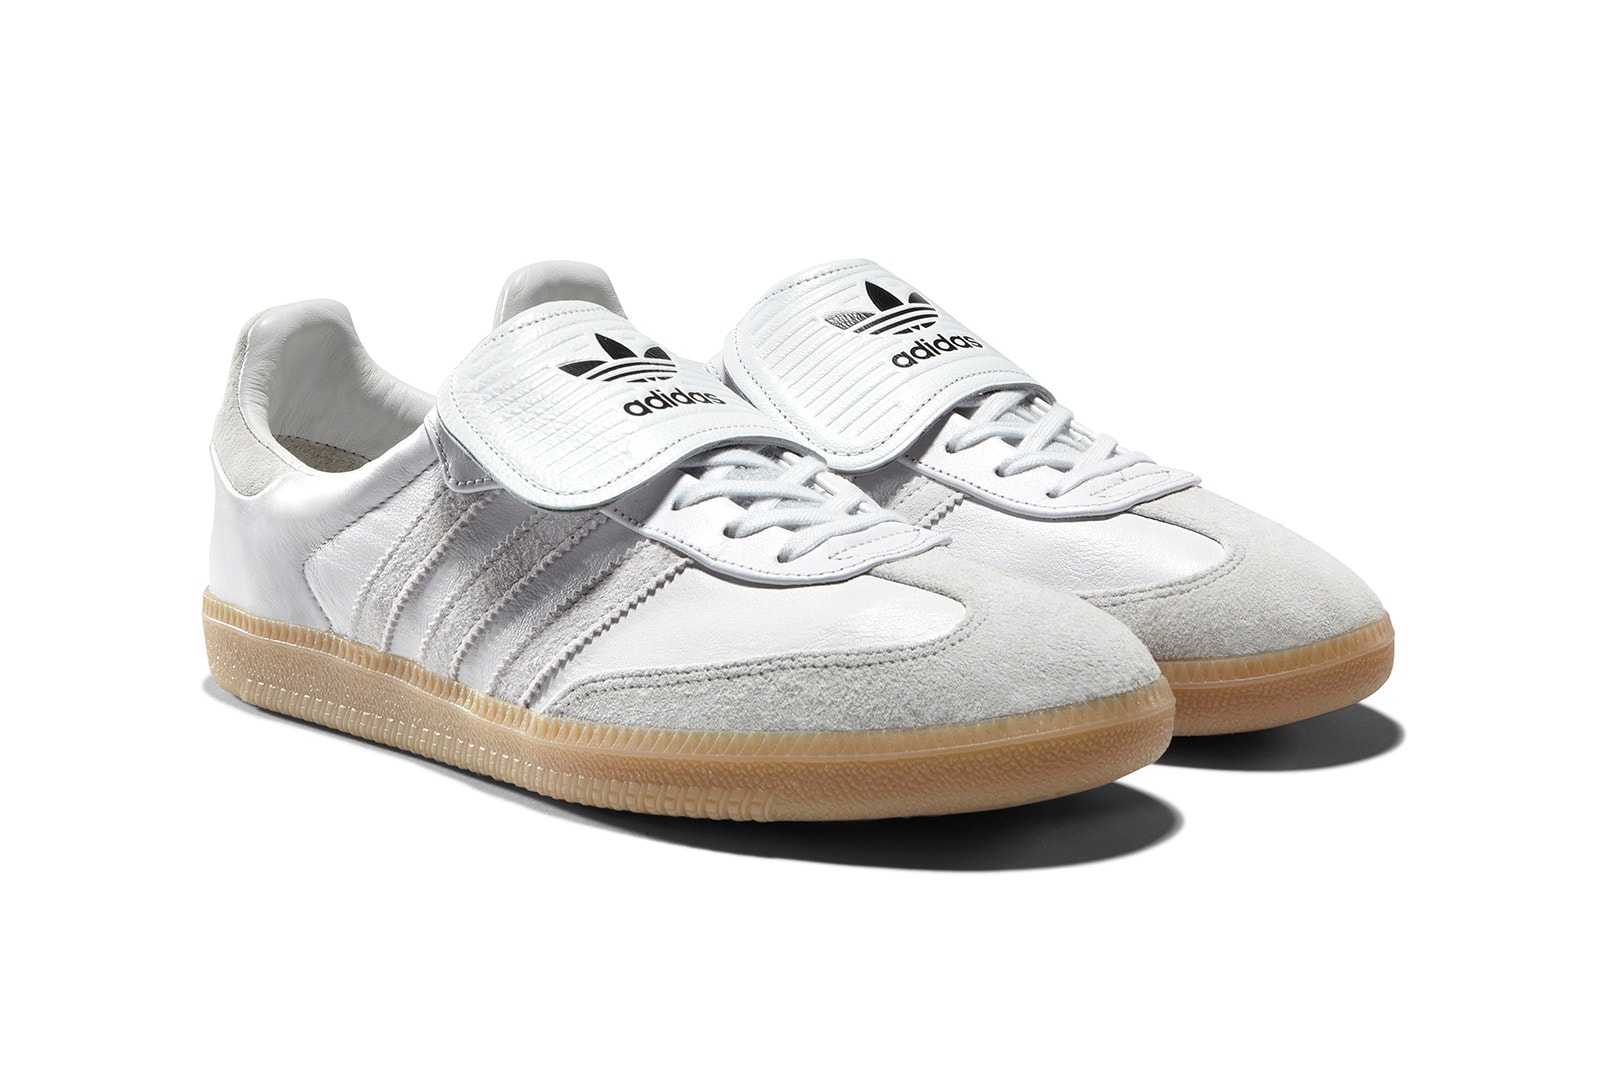 adidas Originals 'Samba' Classic Black White Details To Buy Purchase Availability For Sale Pricing